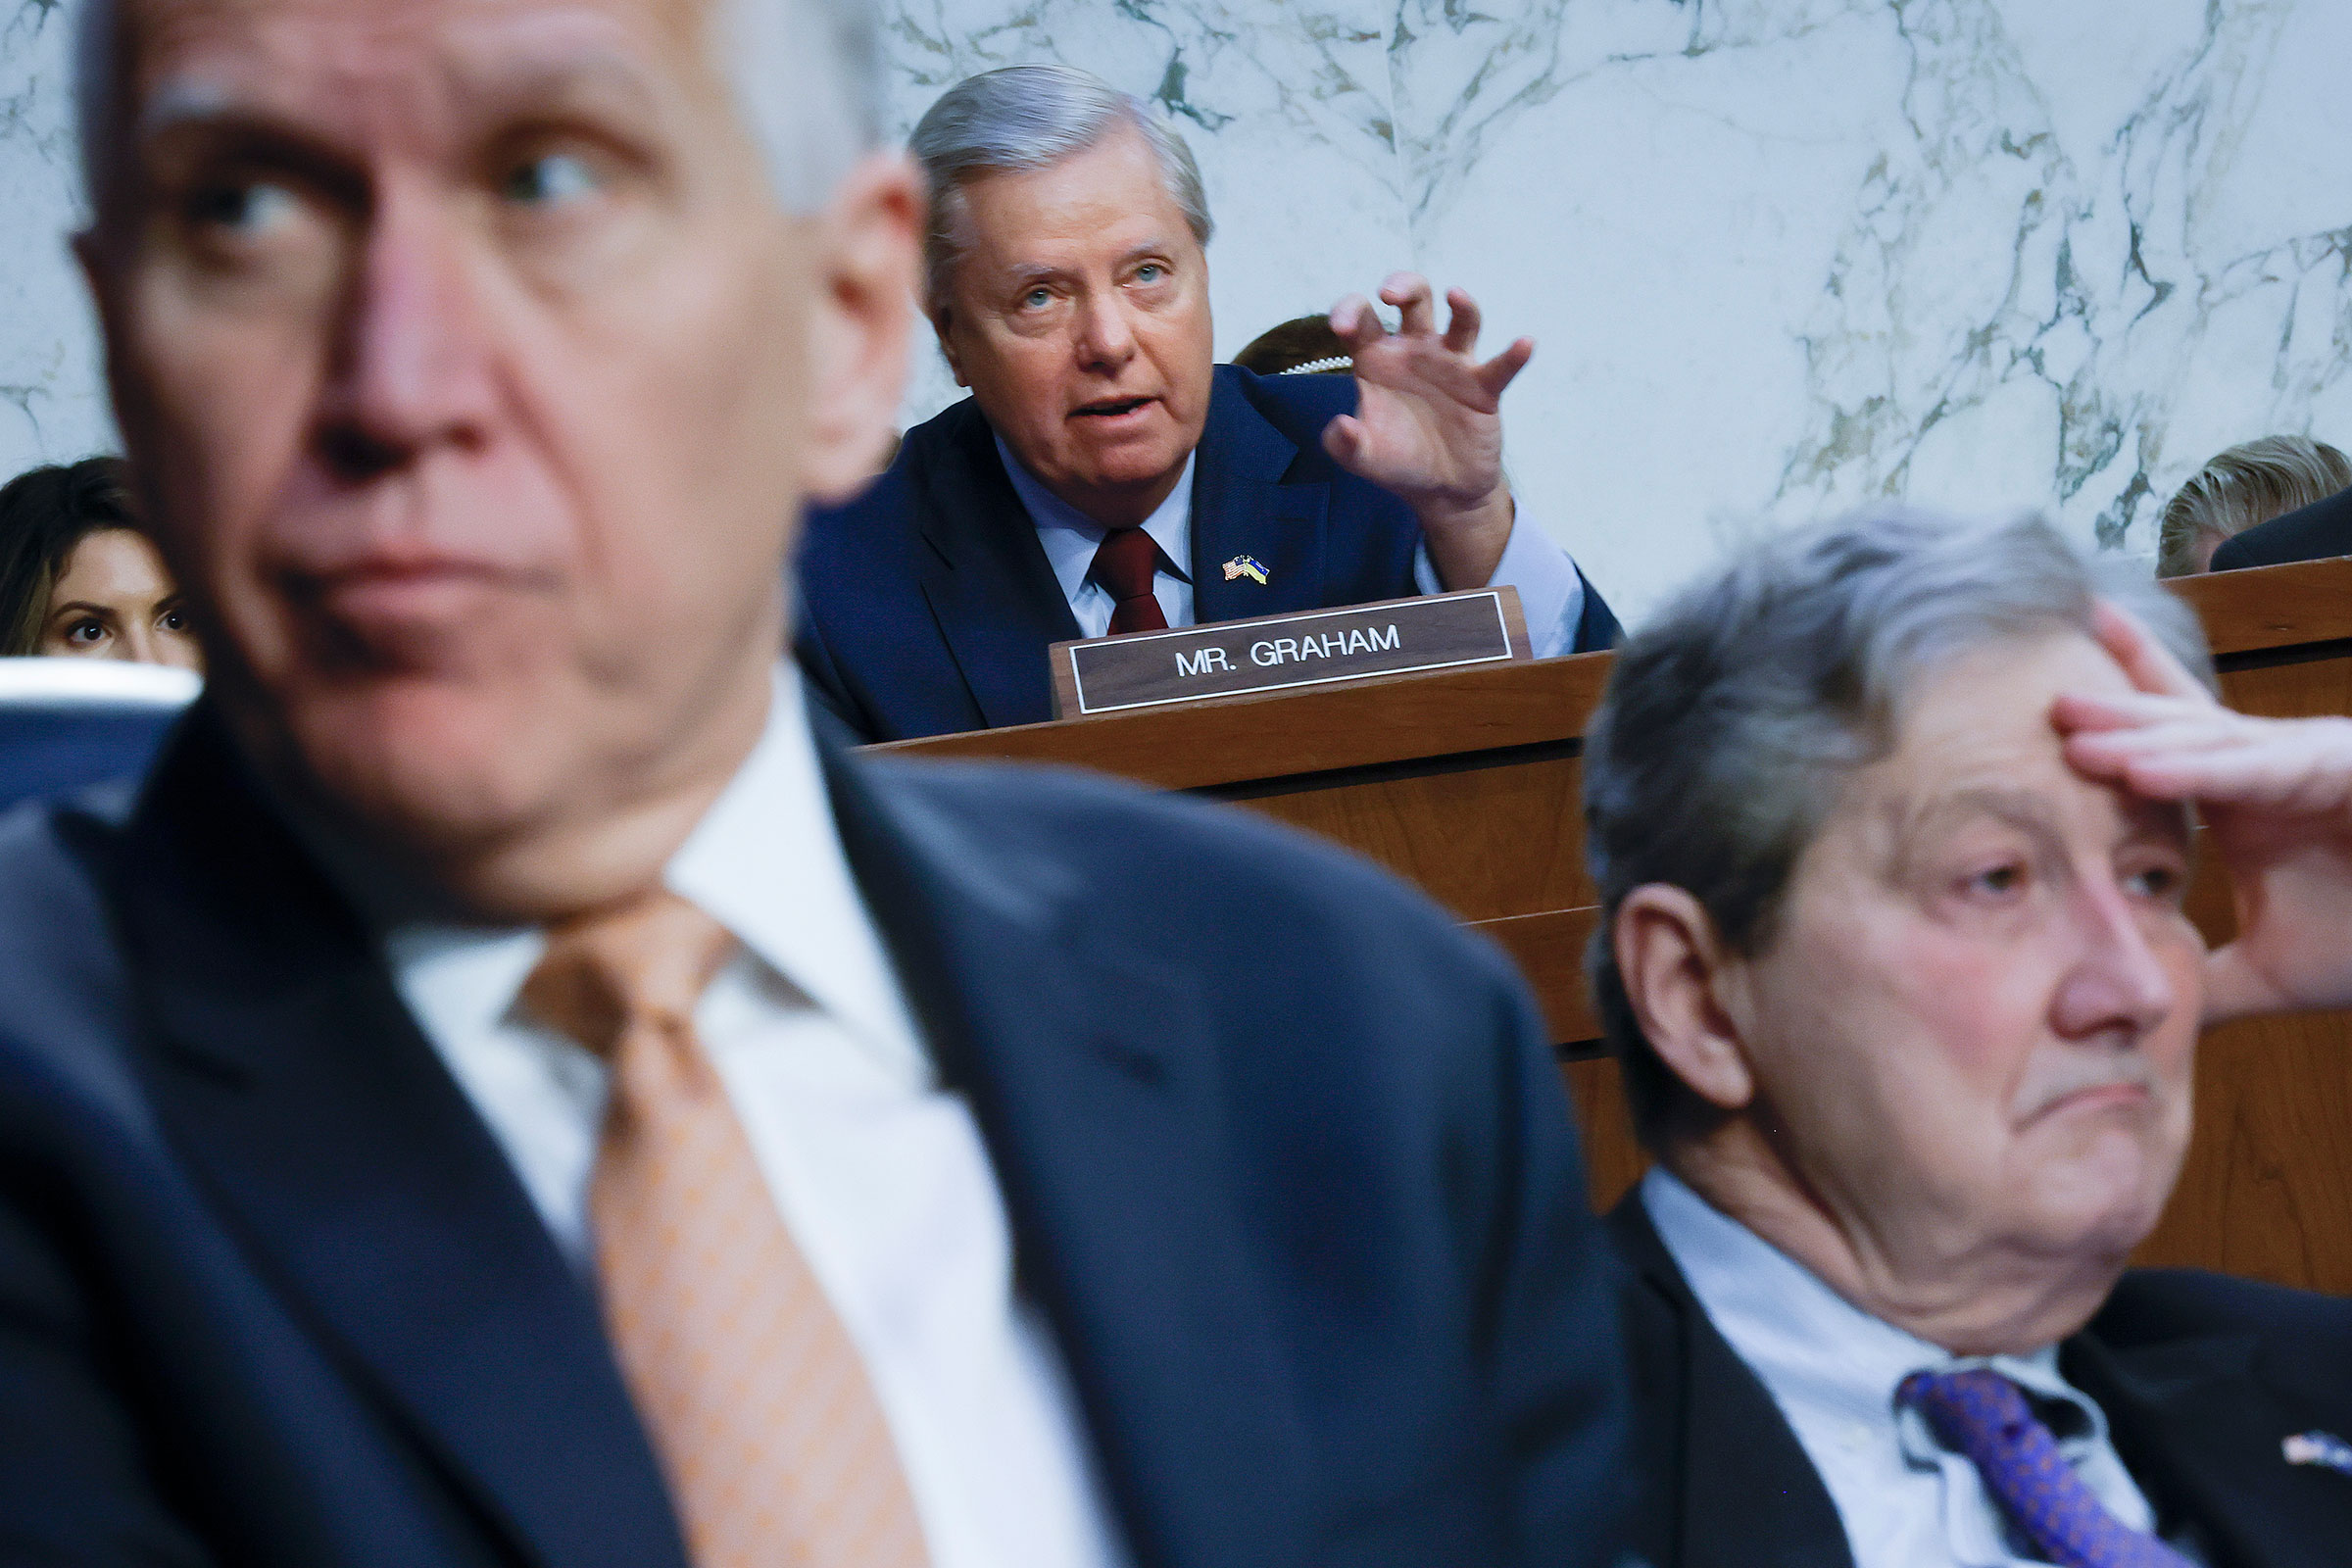 Sen. Lindsey Graham questions U.S. Supreme Court nominee Judge Ketanji Brown Jackson during her Senate Judiciary Committee confirmation hearing in the Hart Senate Office Building on Capitol Hill, on March 23, 2022. (Chip Somodevilla—Getty Images)